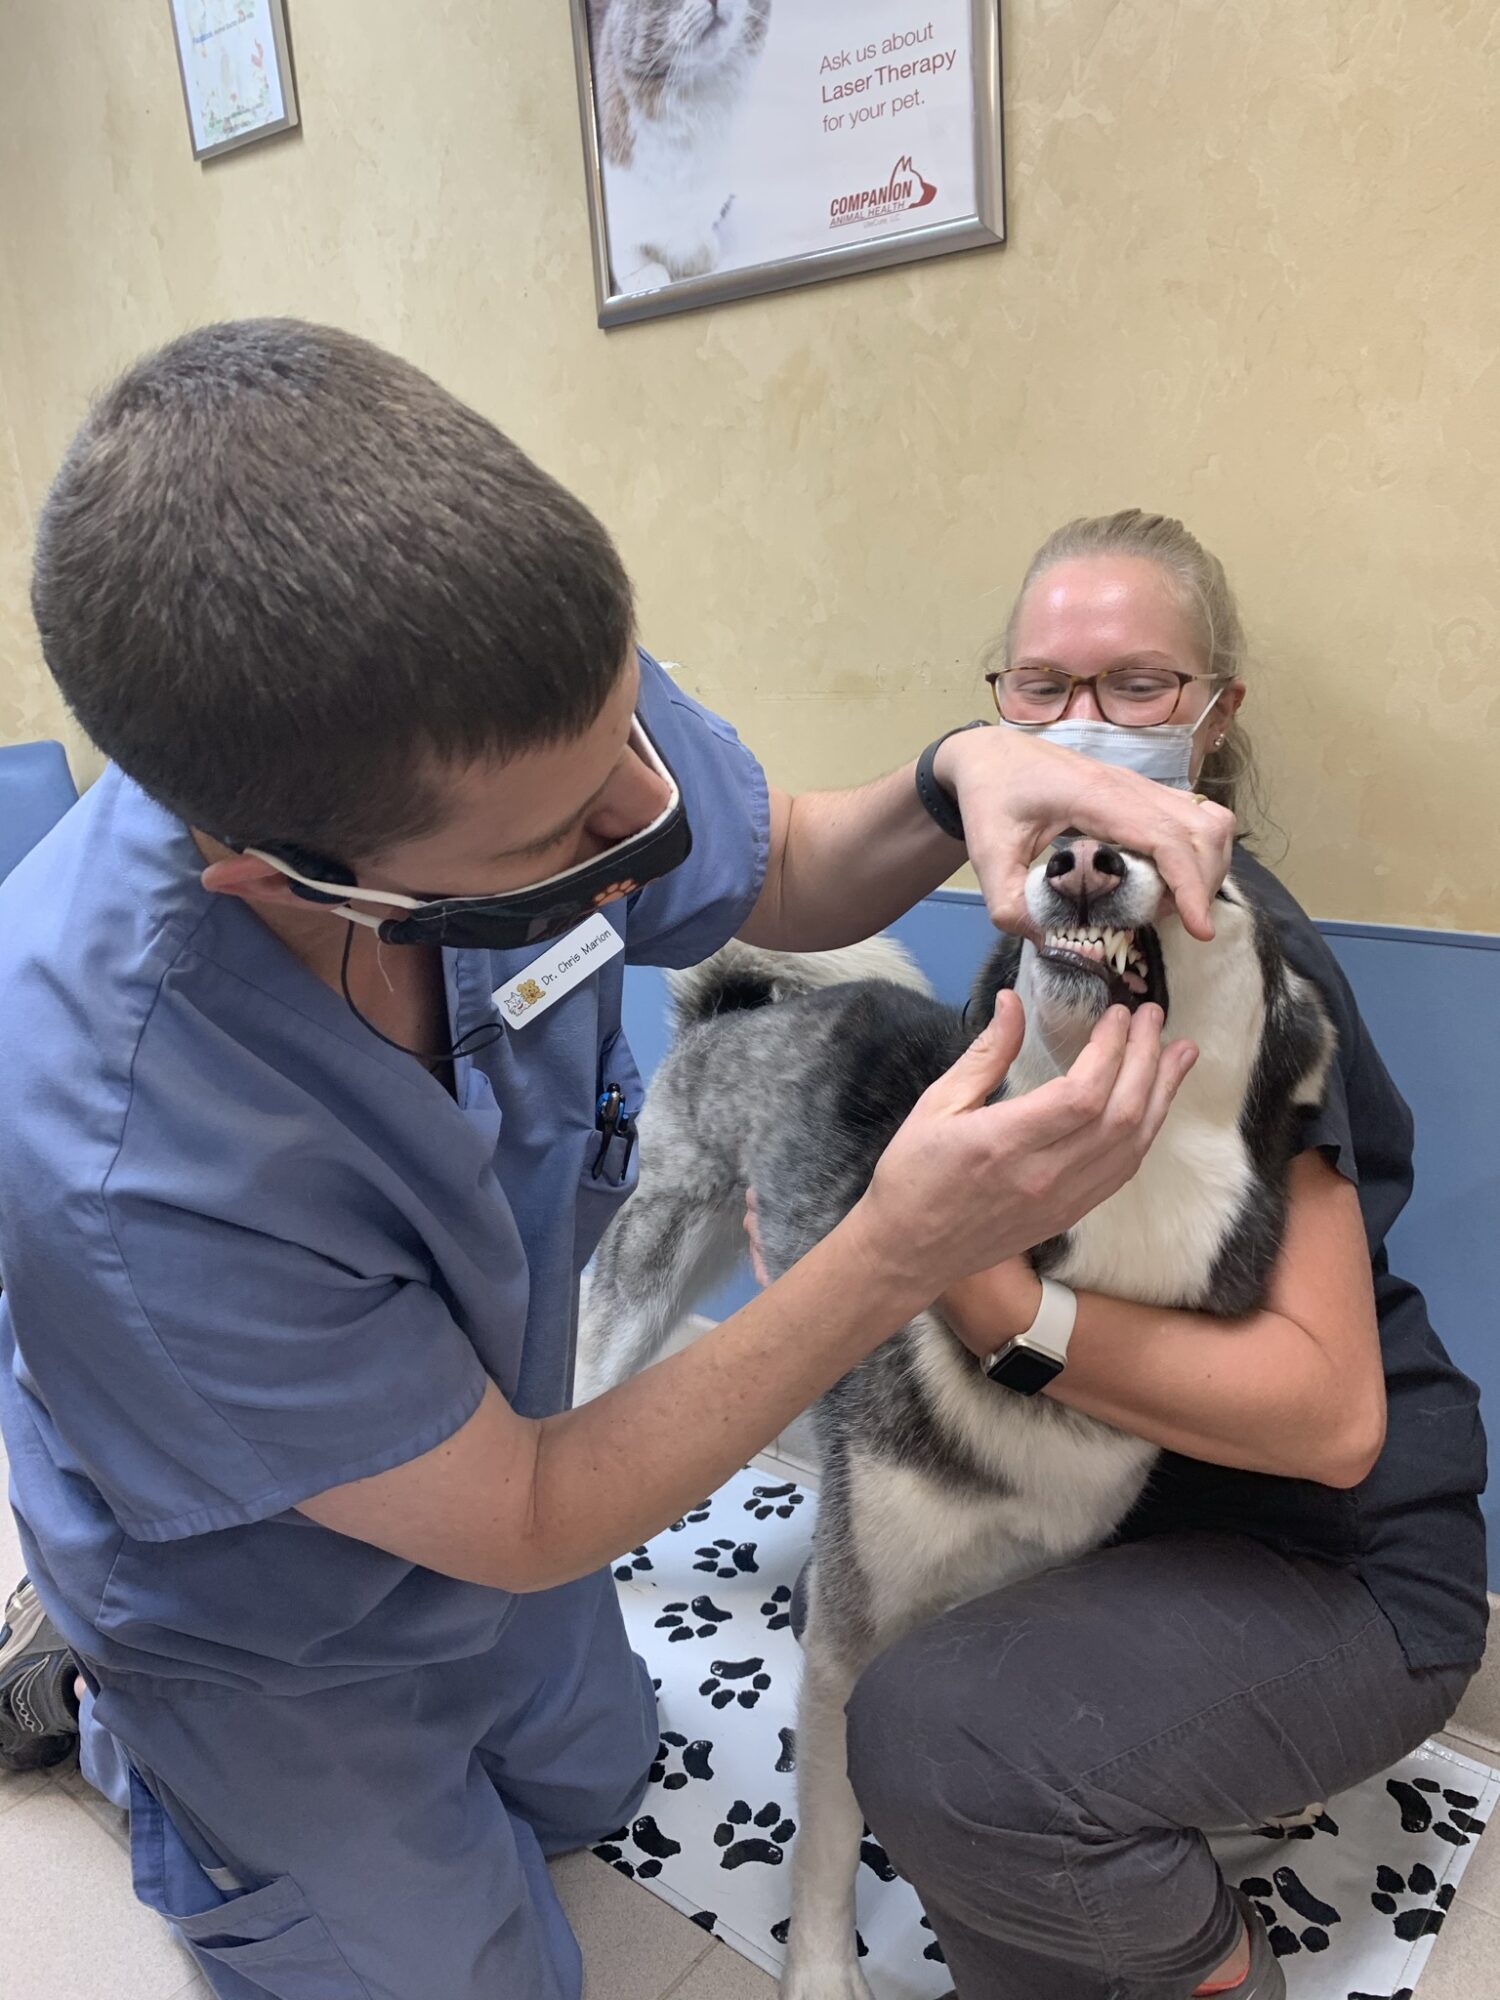 Our doctor and technician will check your pet's ears, teeth, eyes, and body for abnormalities. At this point, you may request a dental estimate.